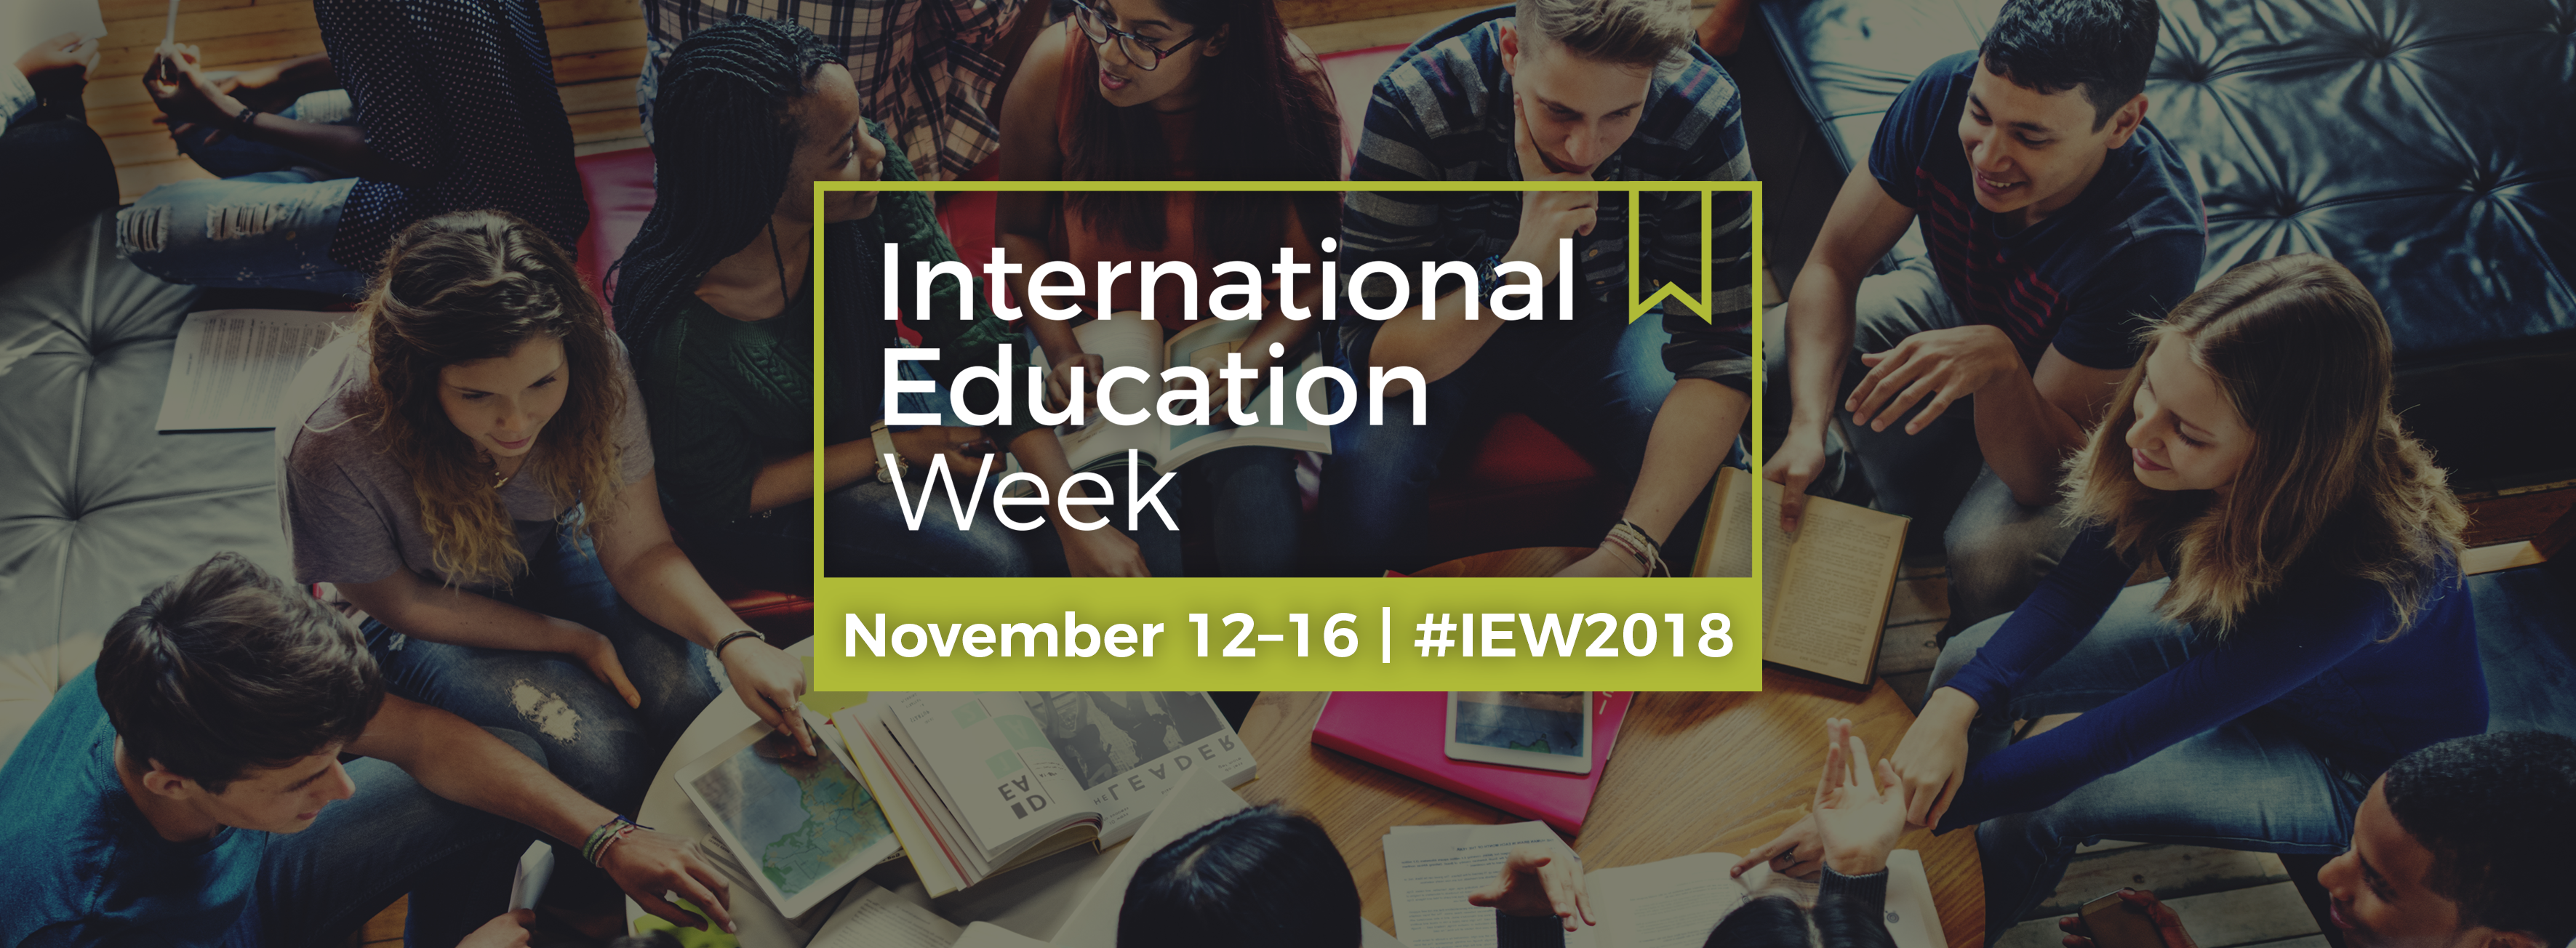 International Education Week is a joint initiative of the U.S. Department of State and the U.S. Department of Education to promote programs that prepare Americans for global interactions. 